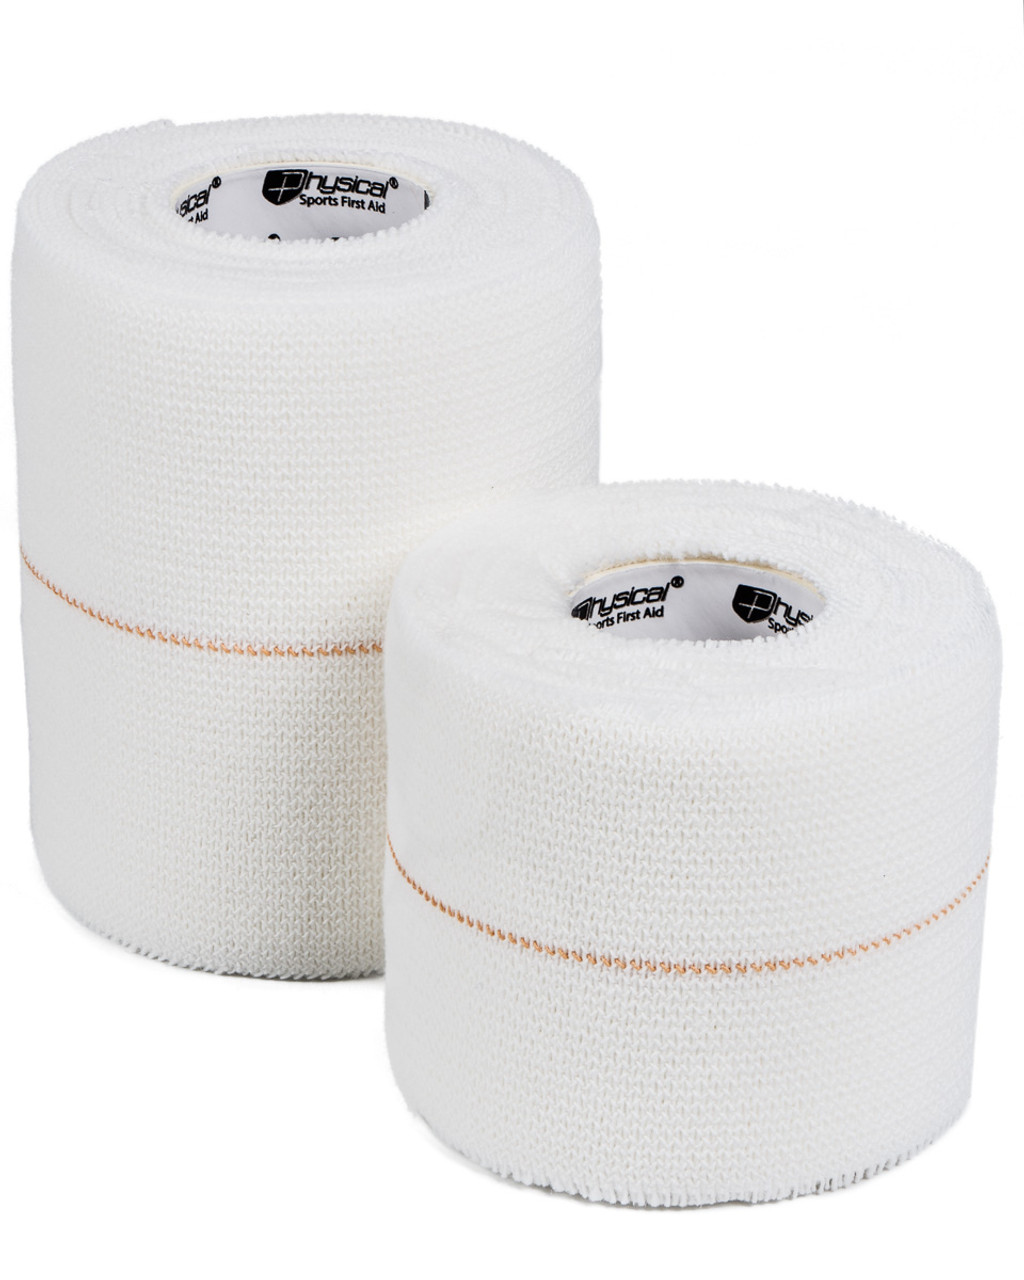 25mm EAB Elastic Adhesive Bandage  Sports Strapping Tape x 108 Rolls SPECIAL